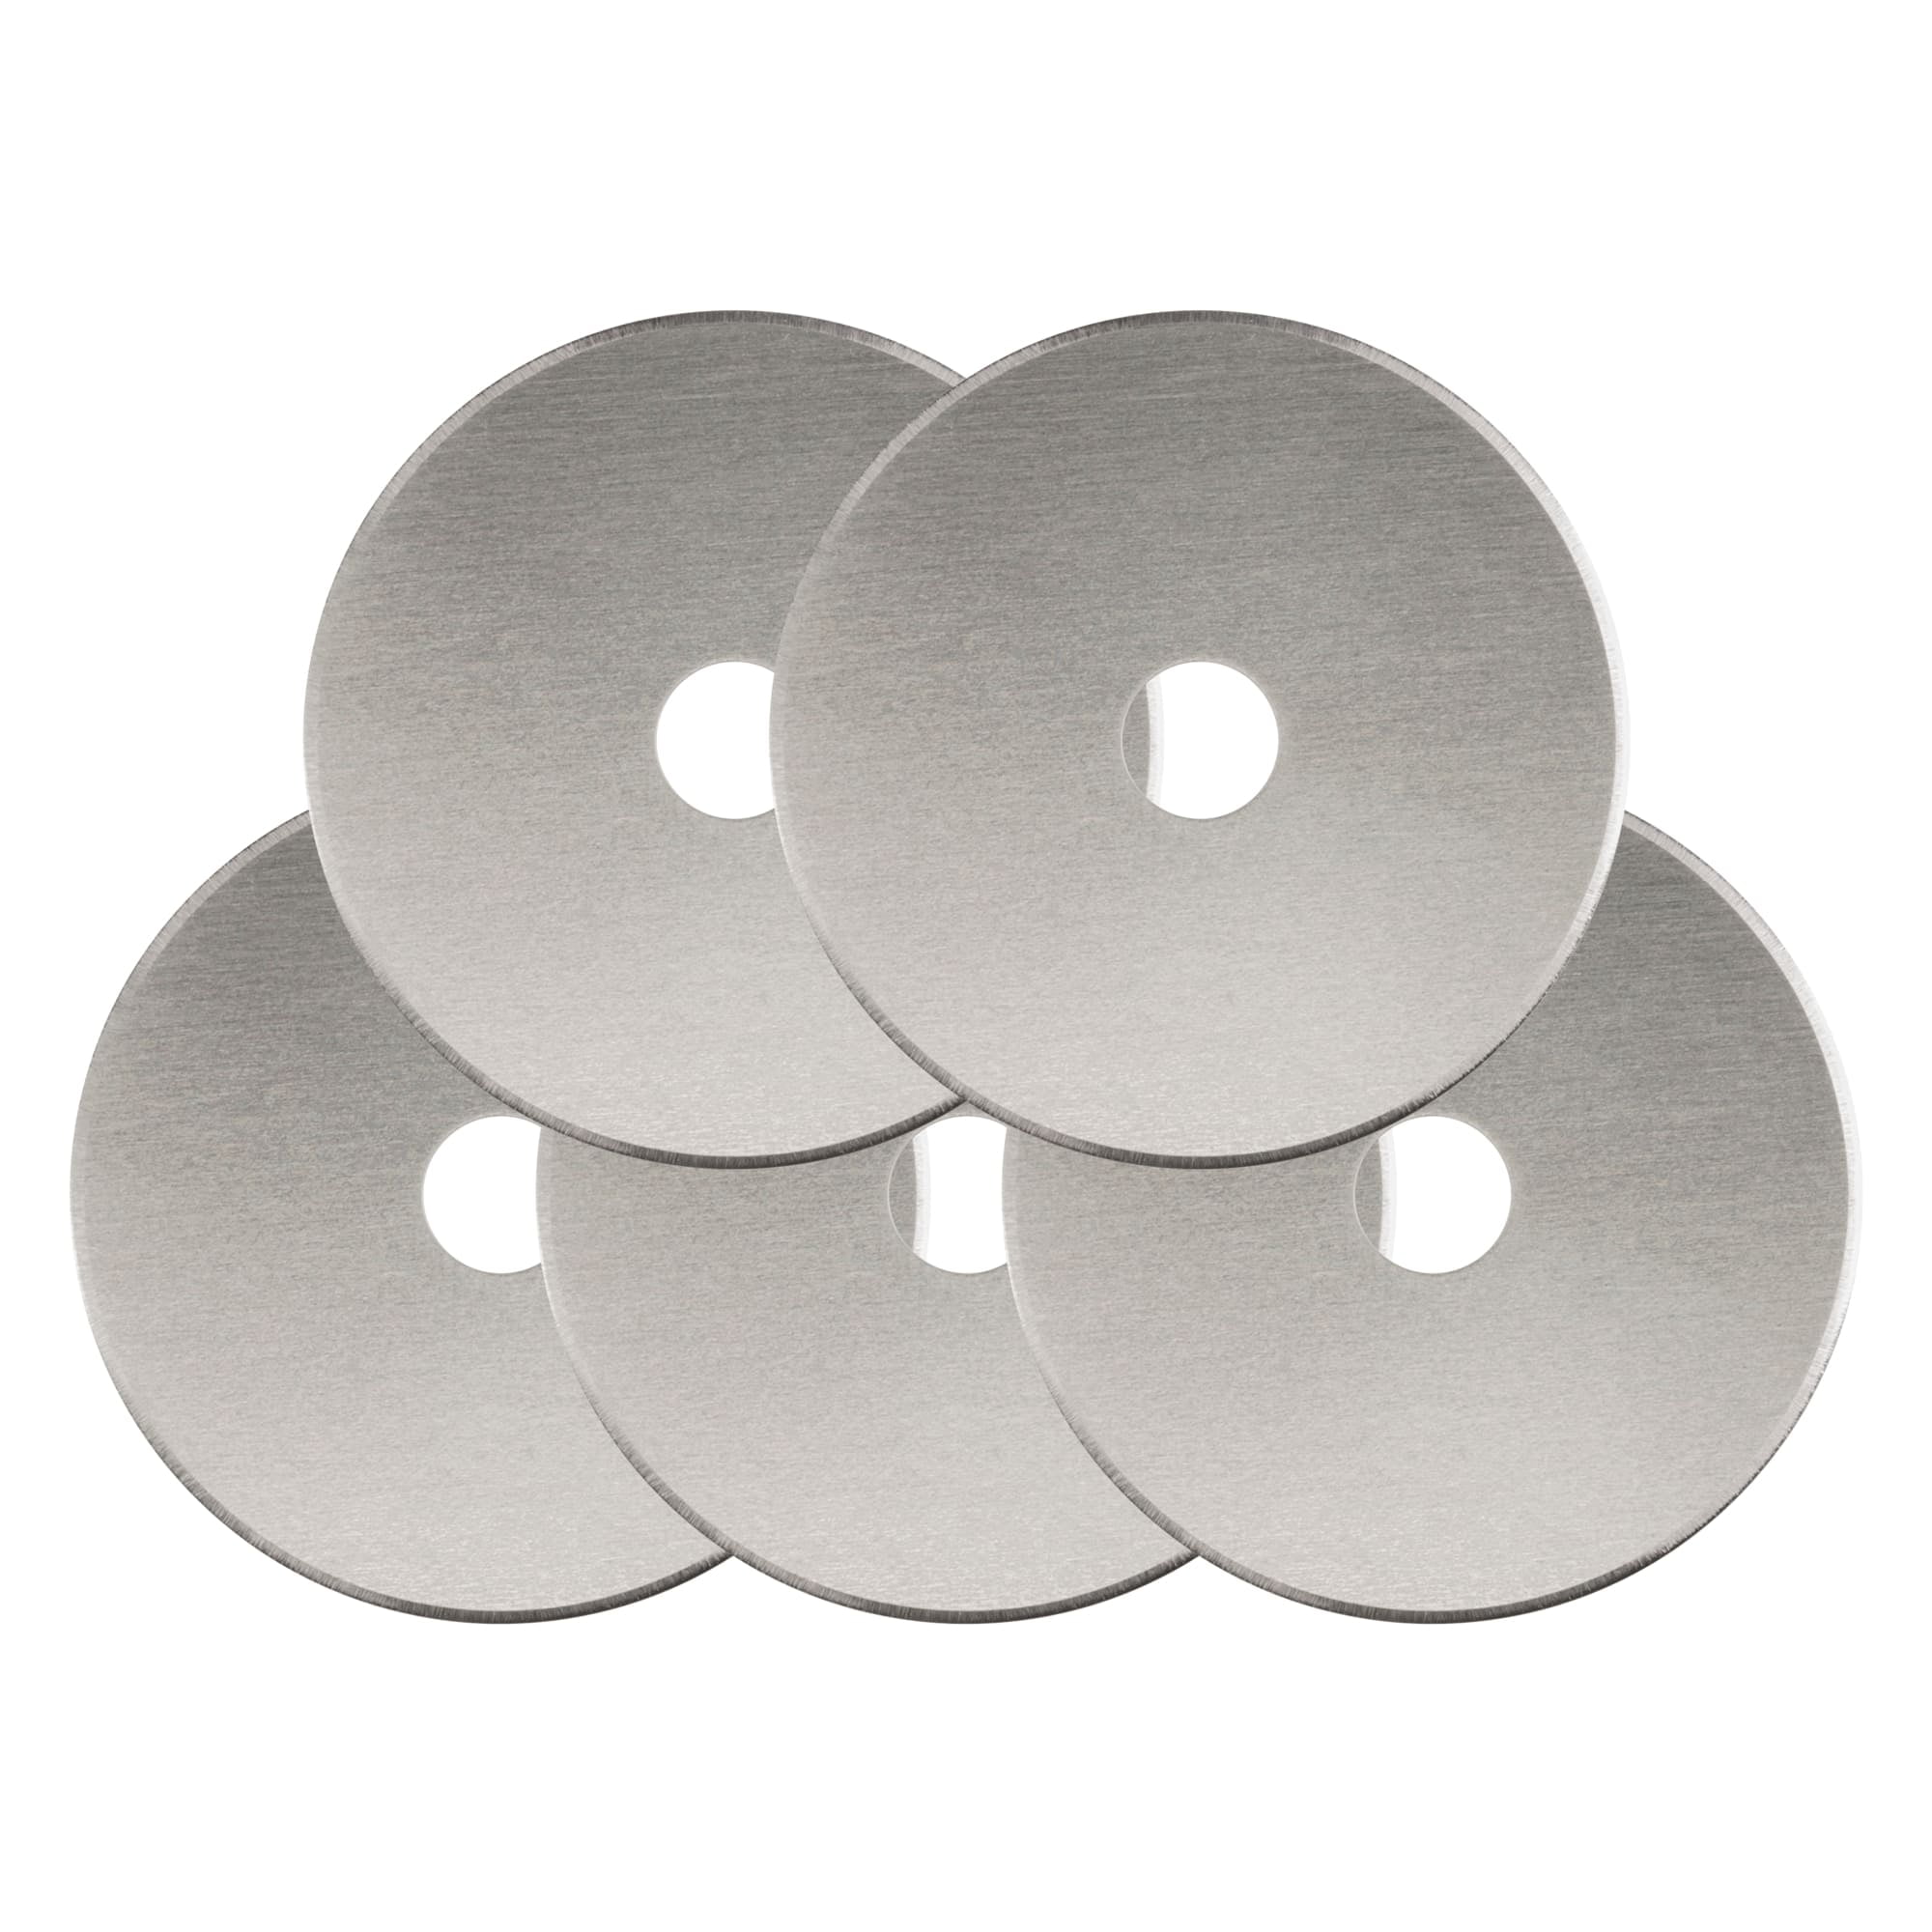 45mm Rotary Cutter Replacement Blades,Rotary Blades 45mm Refill, Rotary  Cutting Blades Compatible with Fiskars,DAFA,Dremel,Decorative Rotary Blades